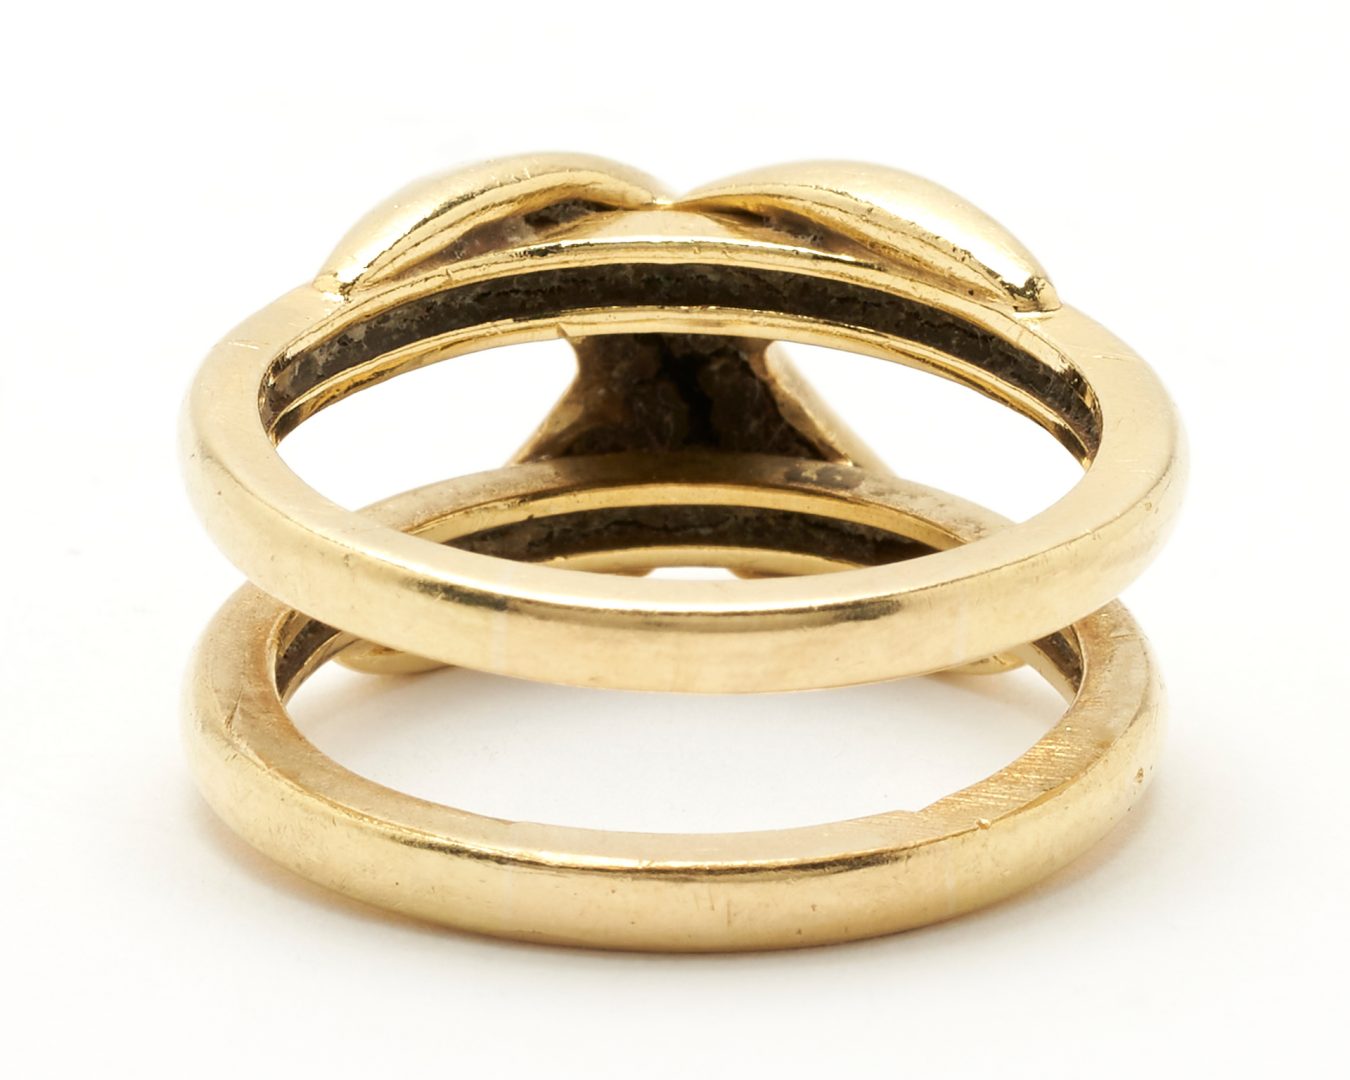 Lot 229: 18K Gold X Ring | Case Auctions